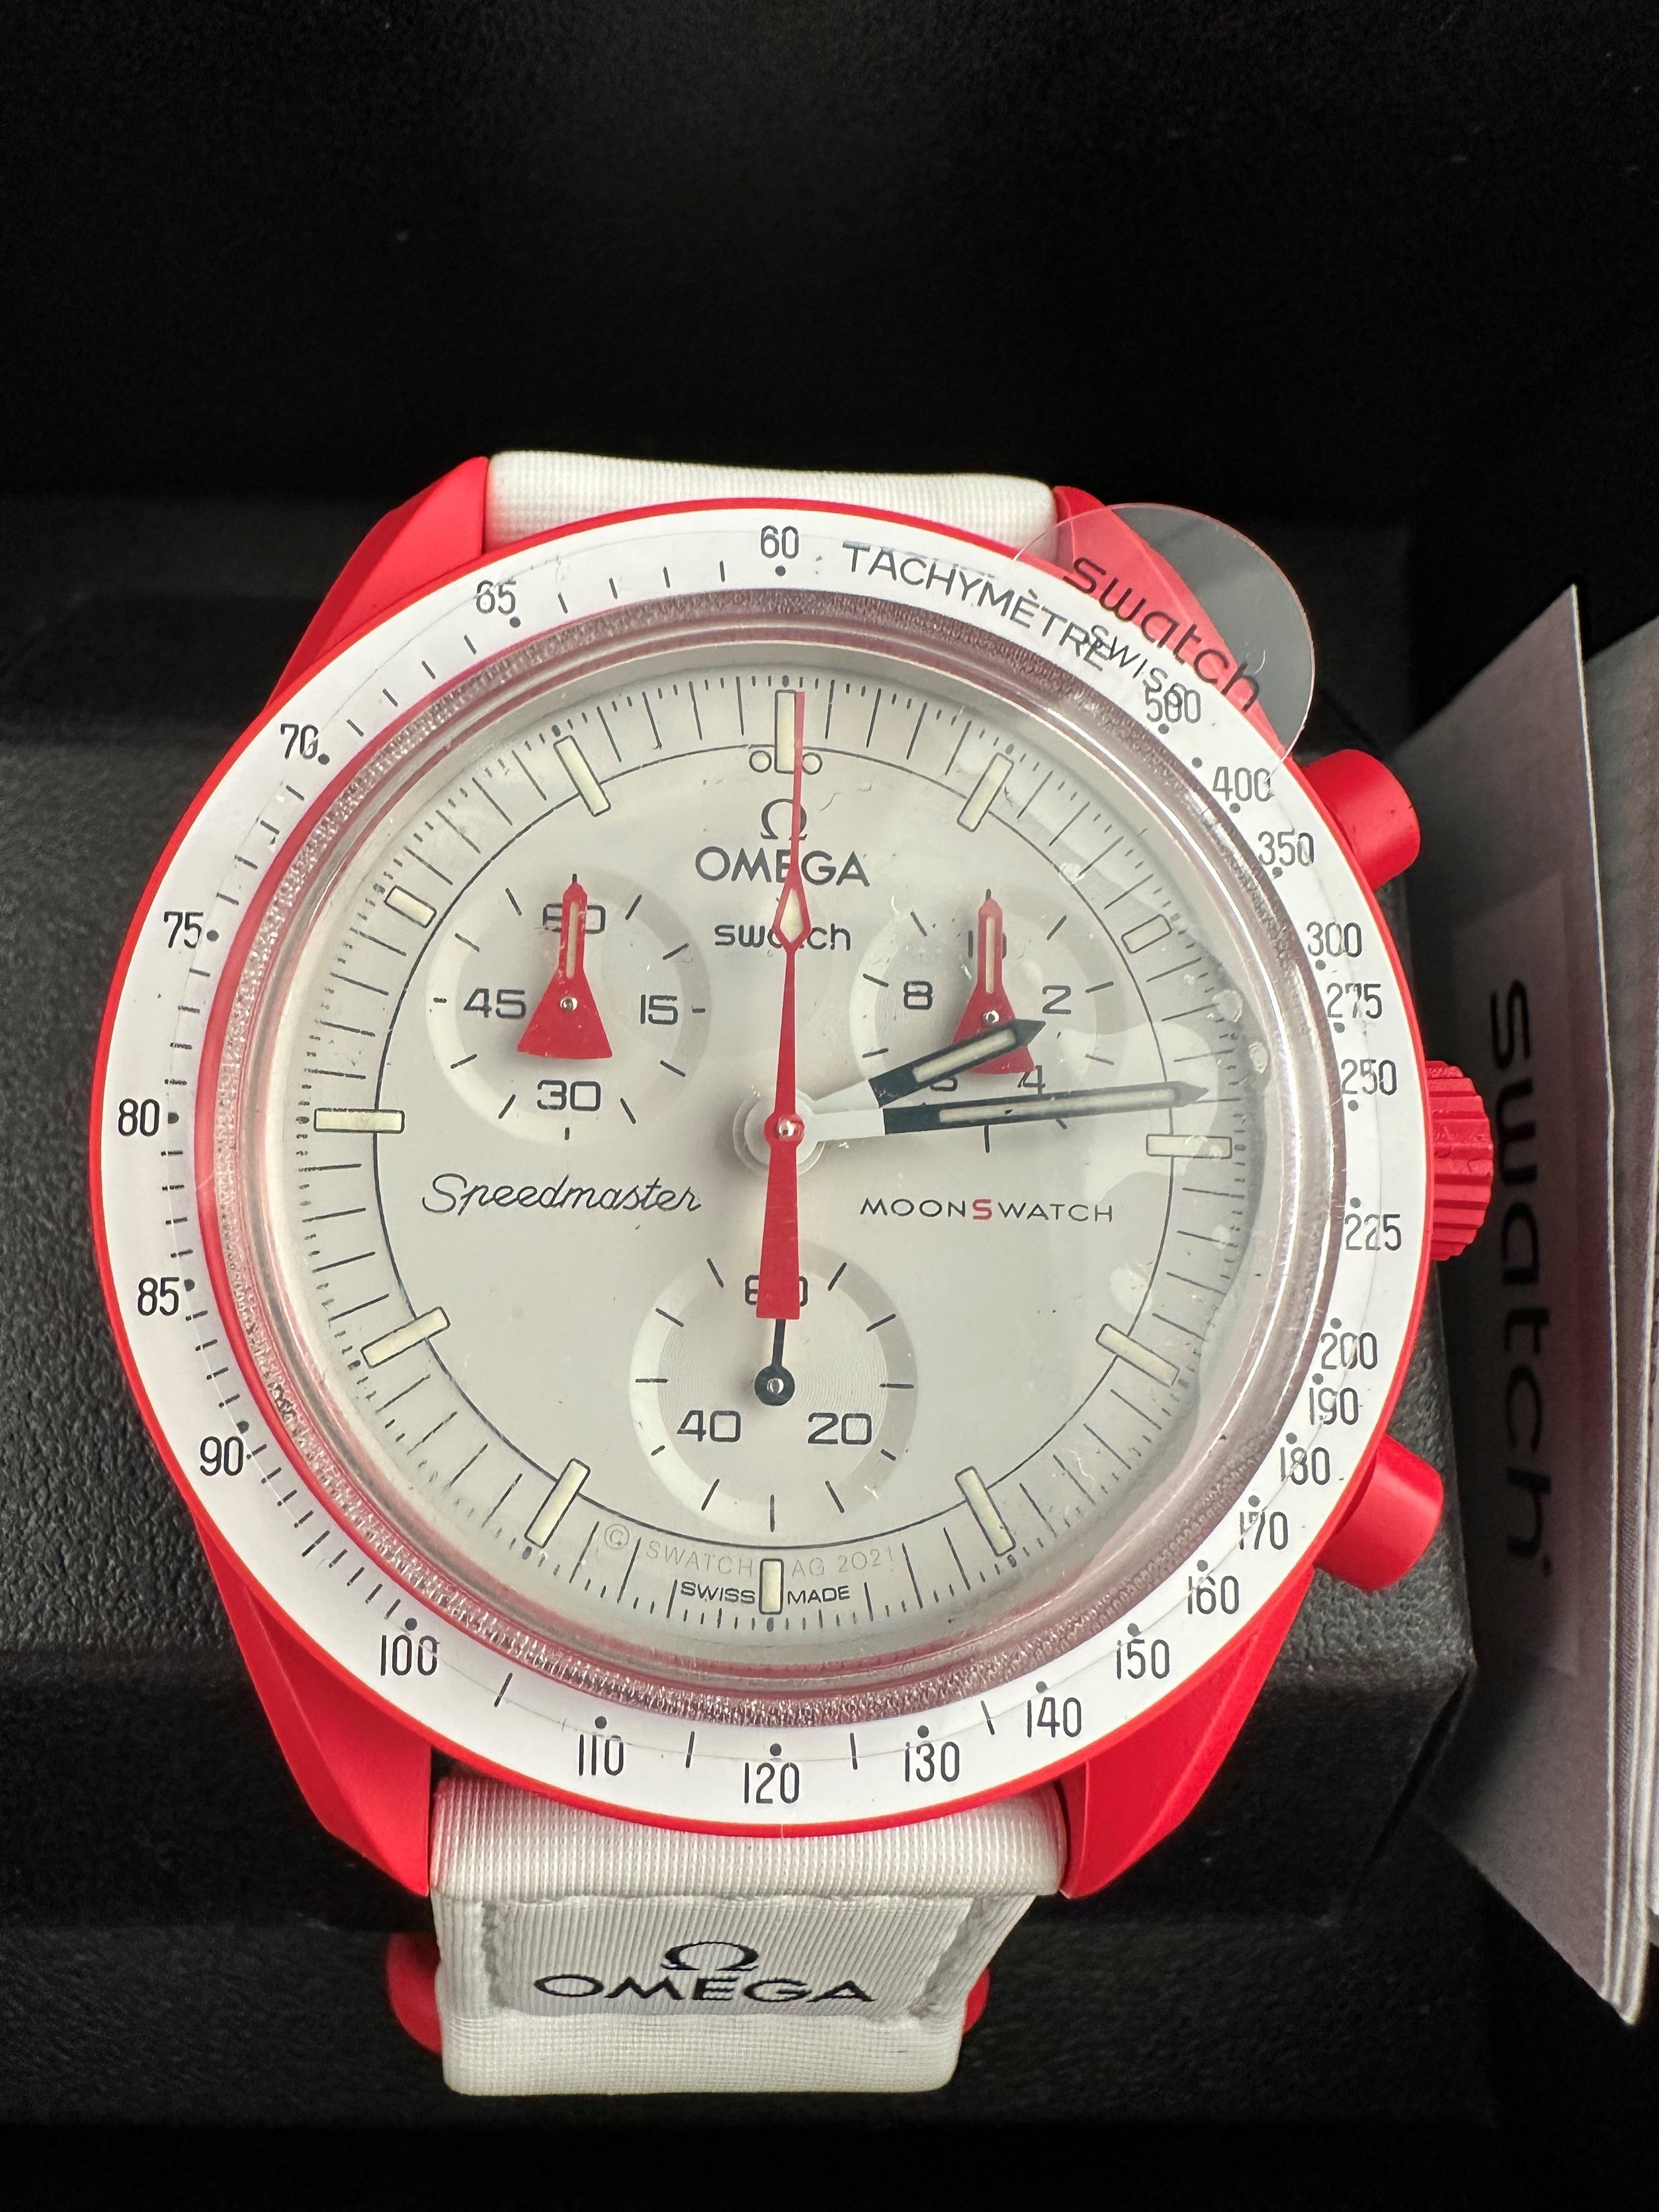 Omega Swatch Bioceramic Moonswatch "Mission to Mars" | Harley's Time LLC